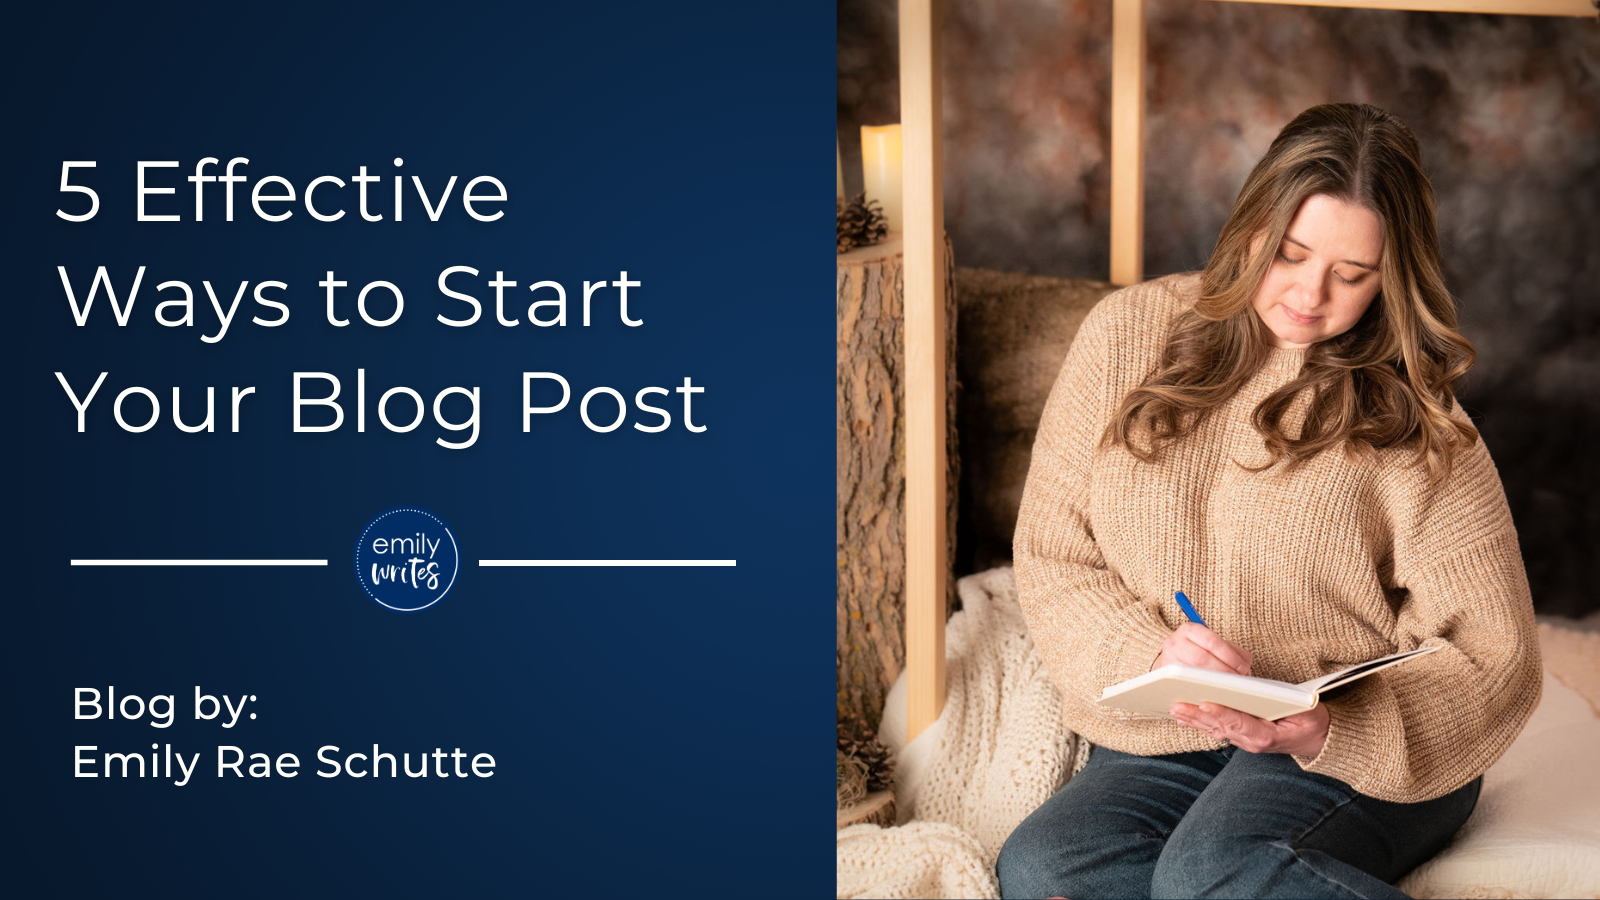 5 effective ways to start your blog post